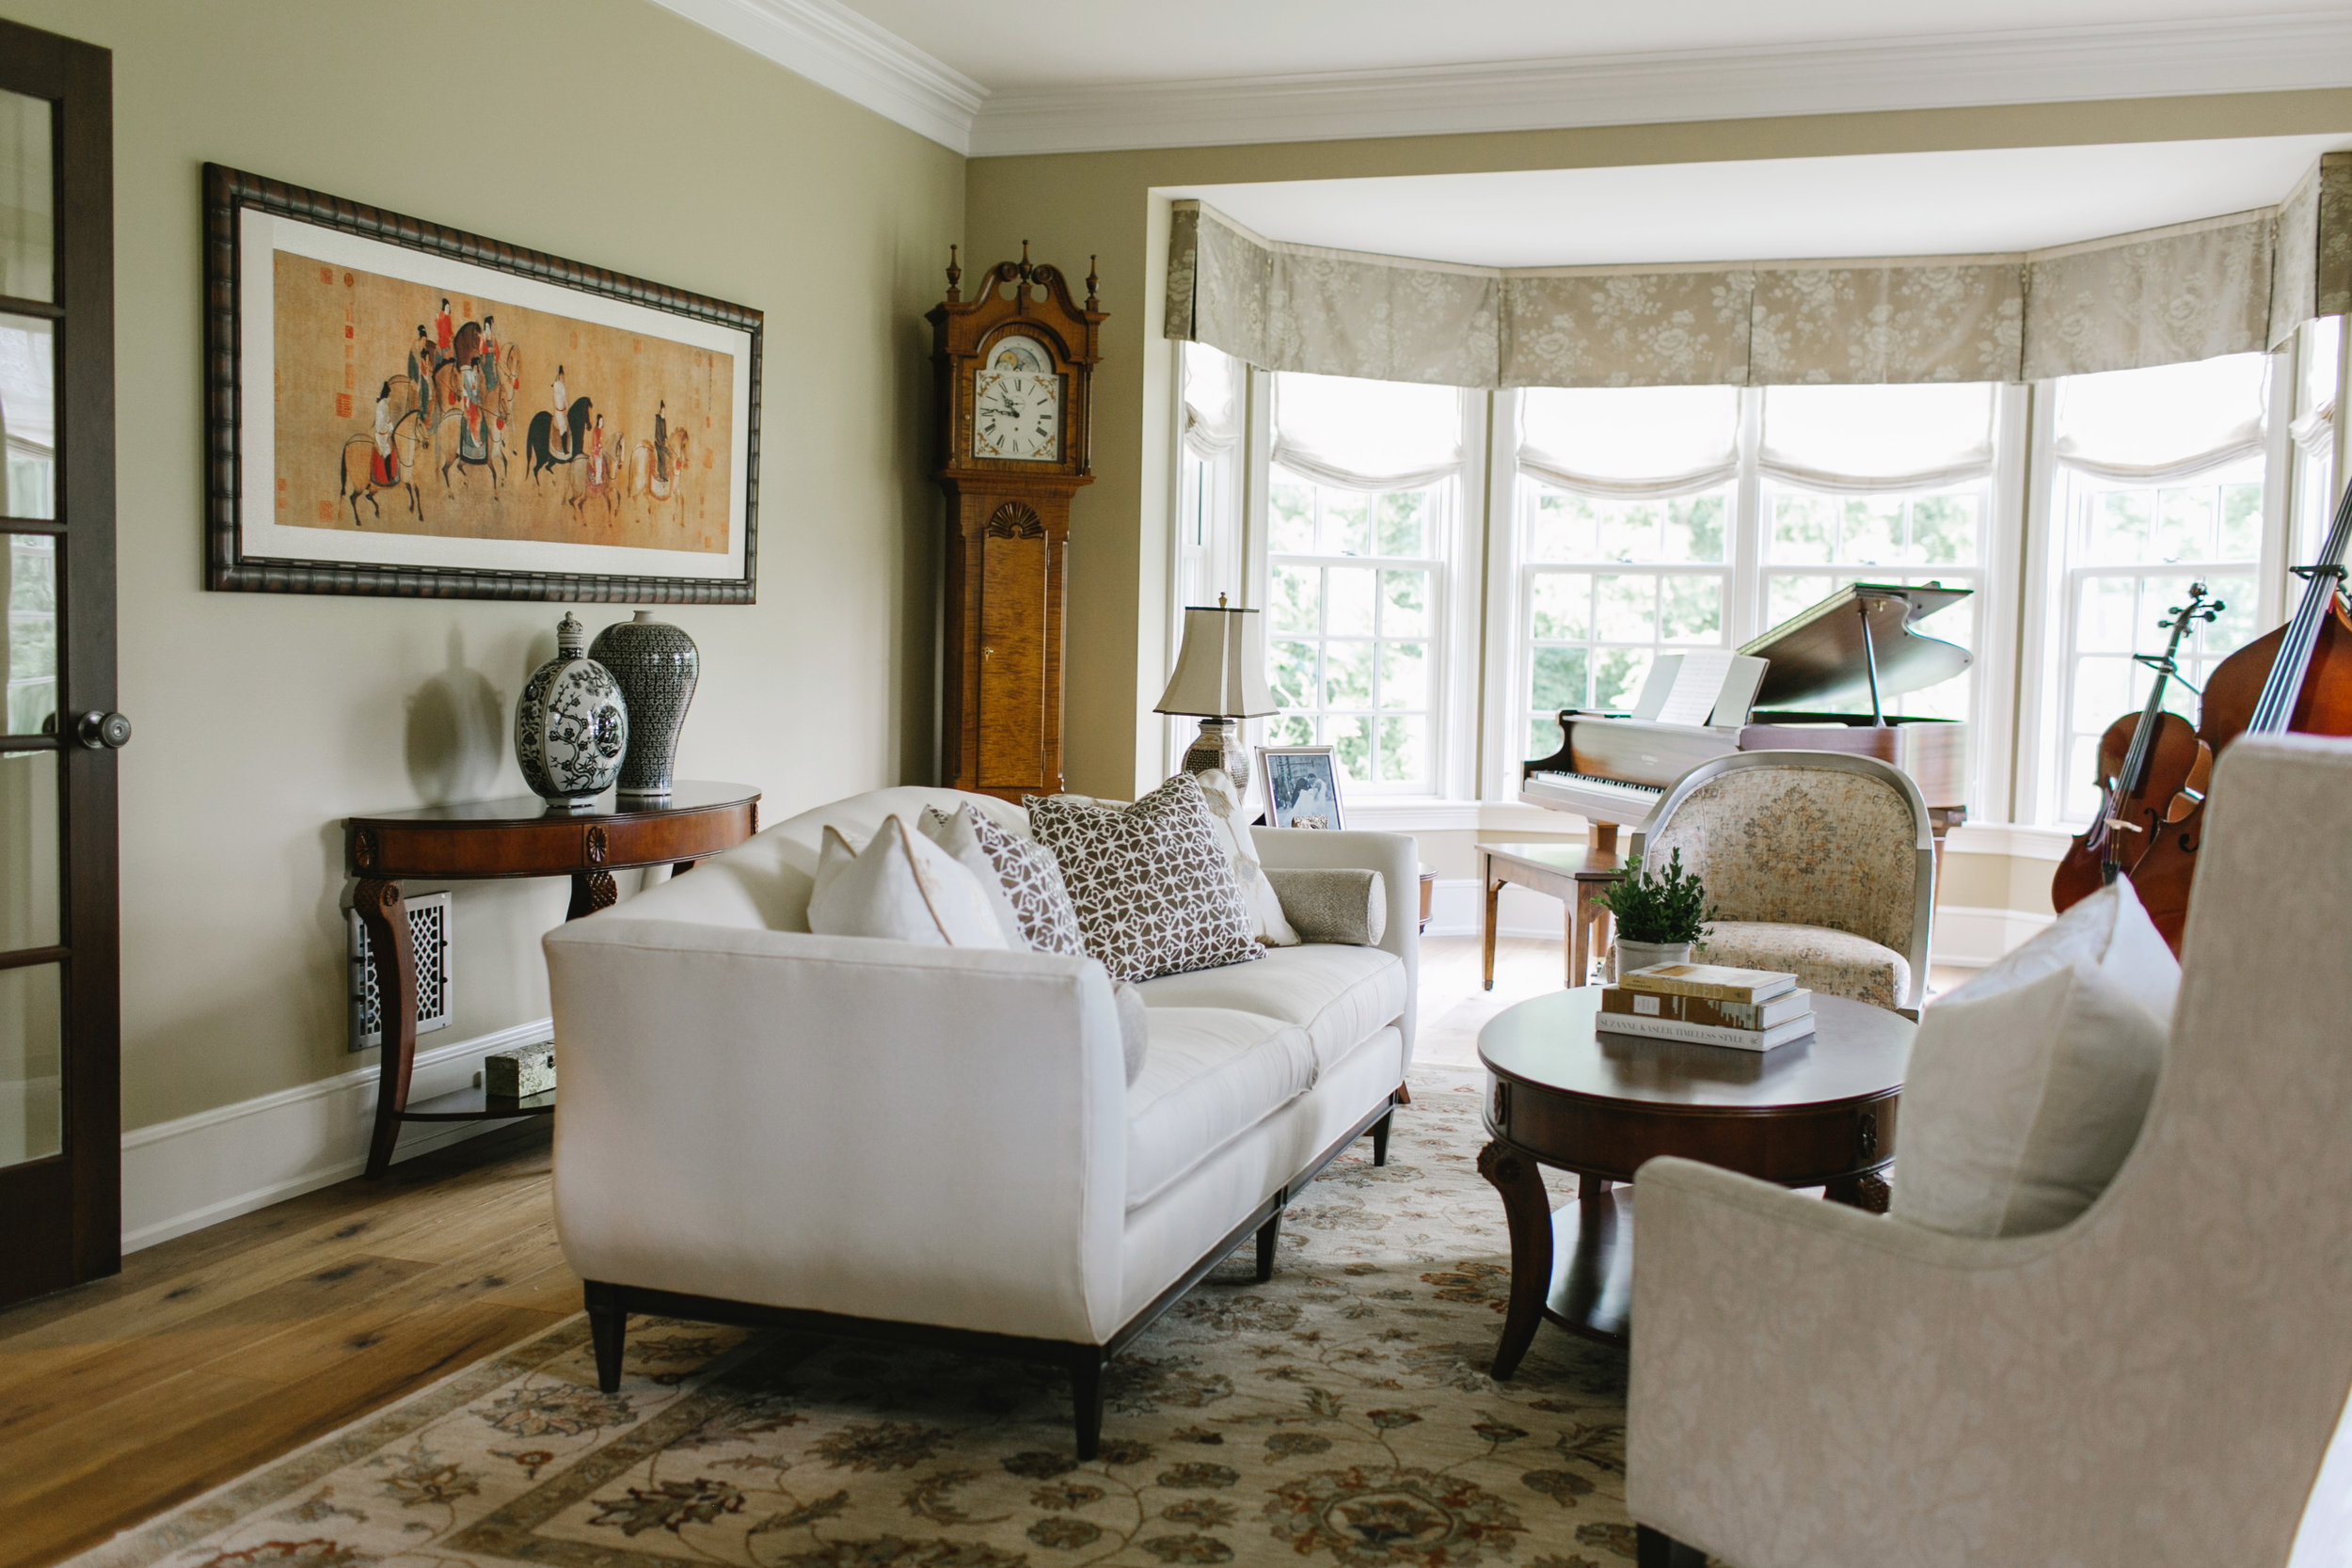 Accent pillows and window treatments